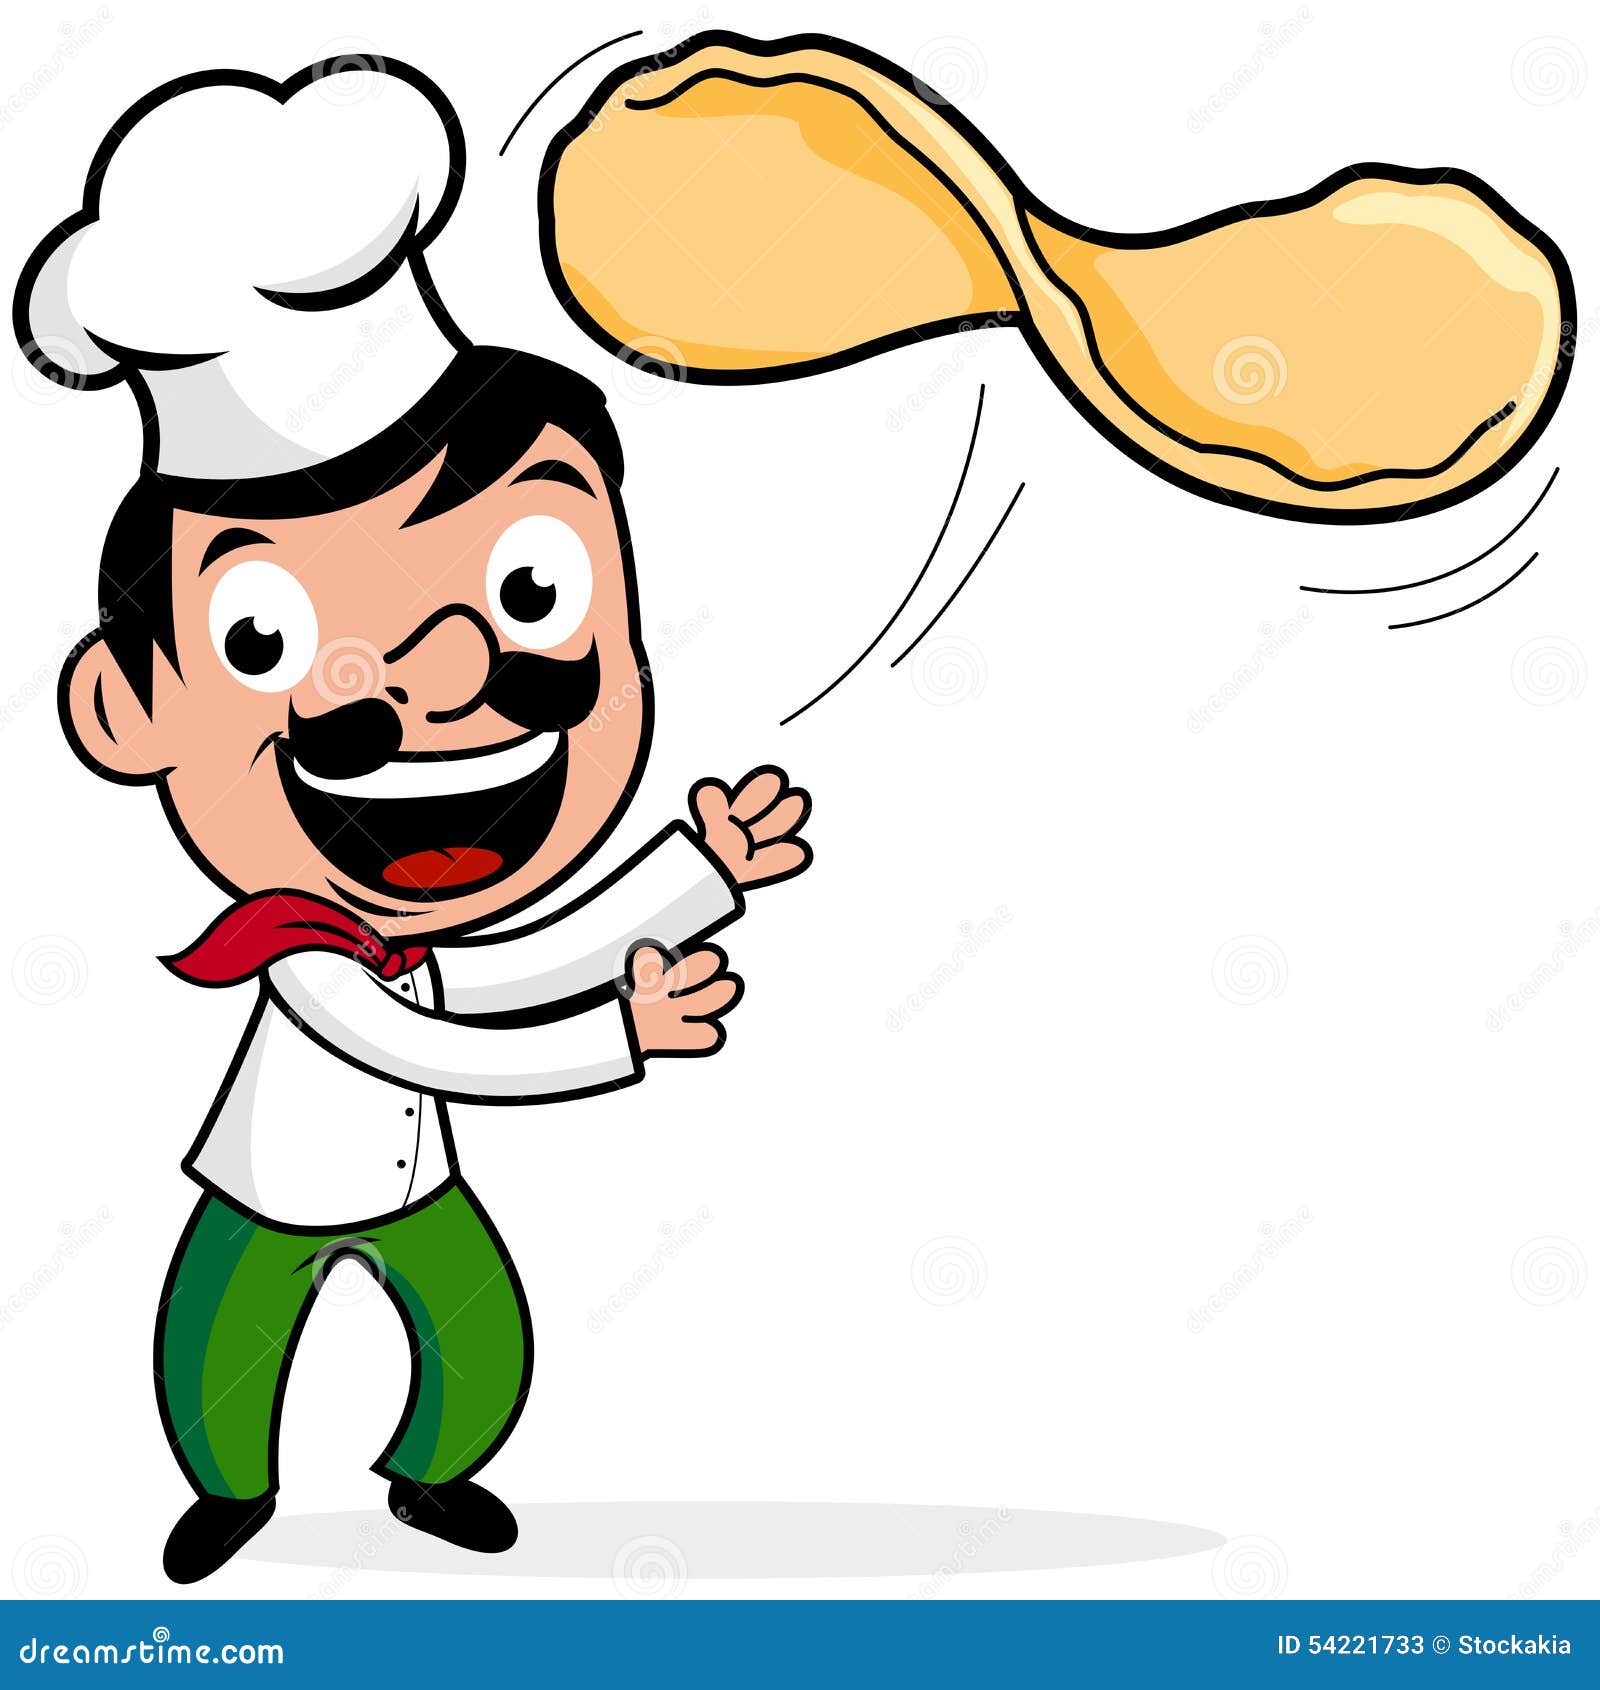 pizza clipart animations - photo #34